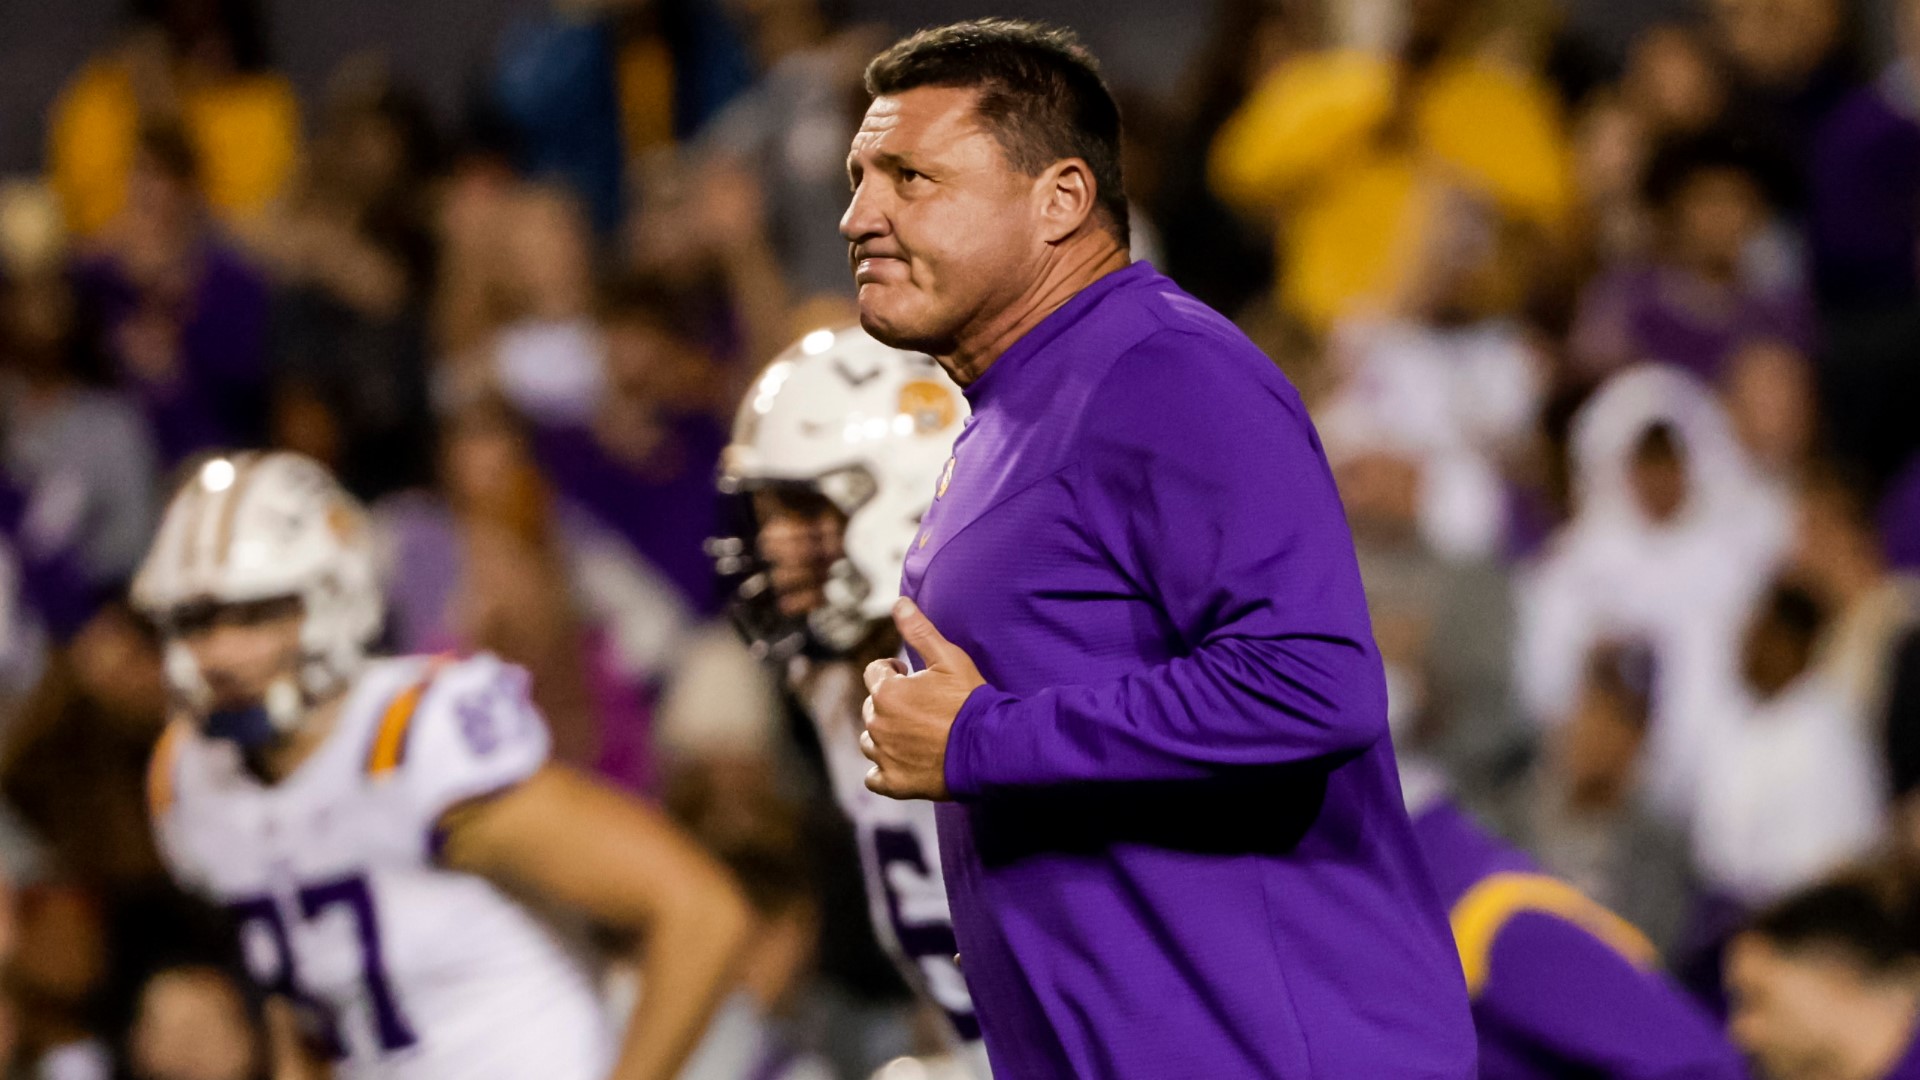 Orgeron coached the Tigers to a win over Texas A&M in his final home game